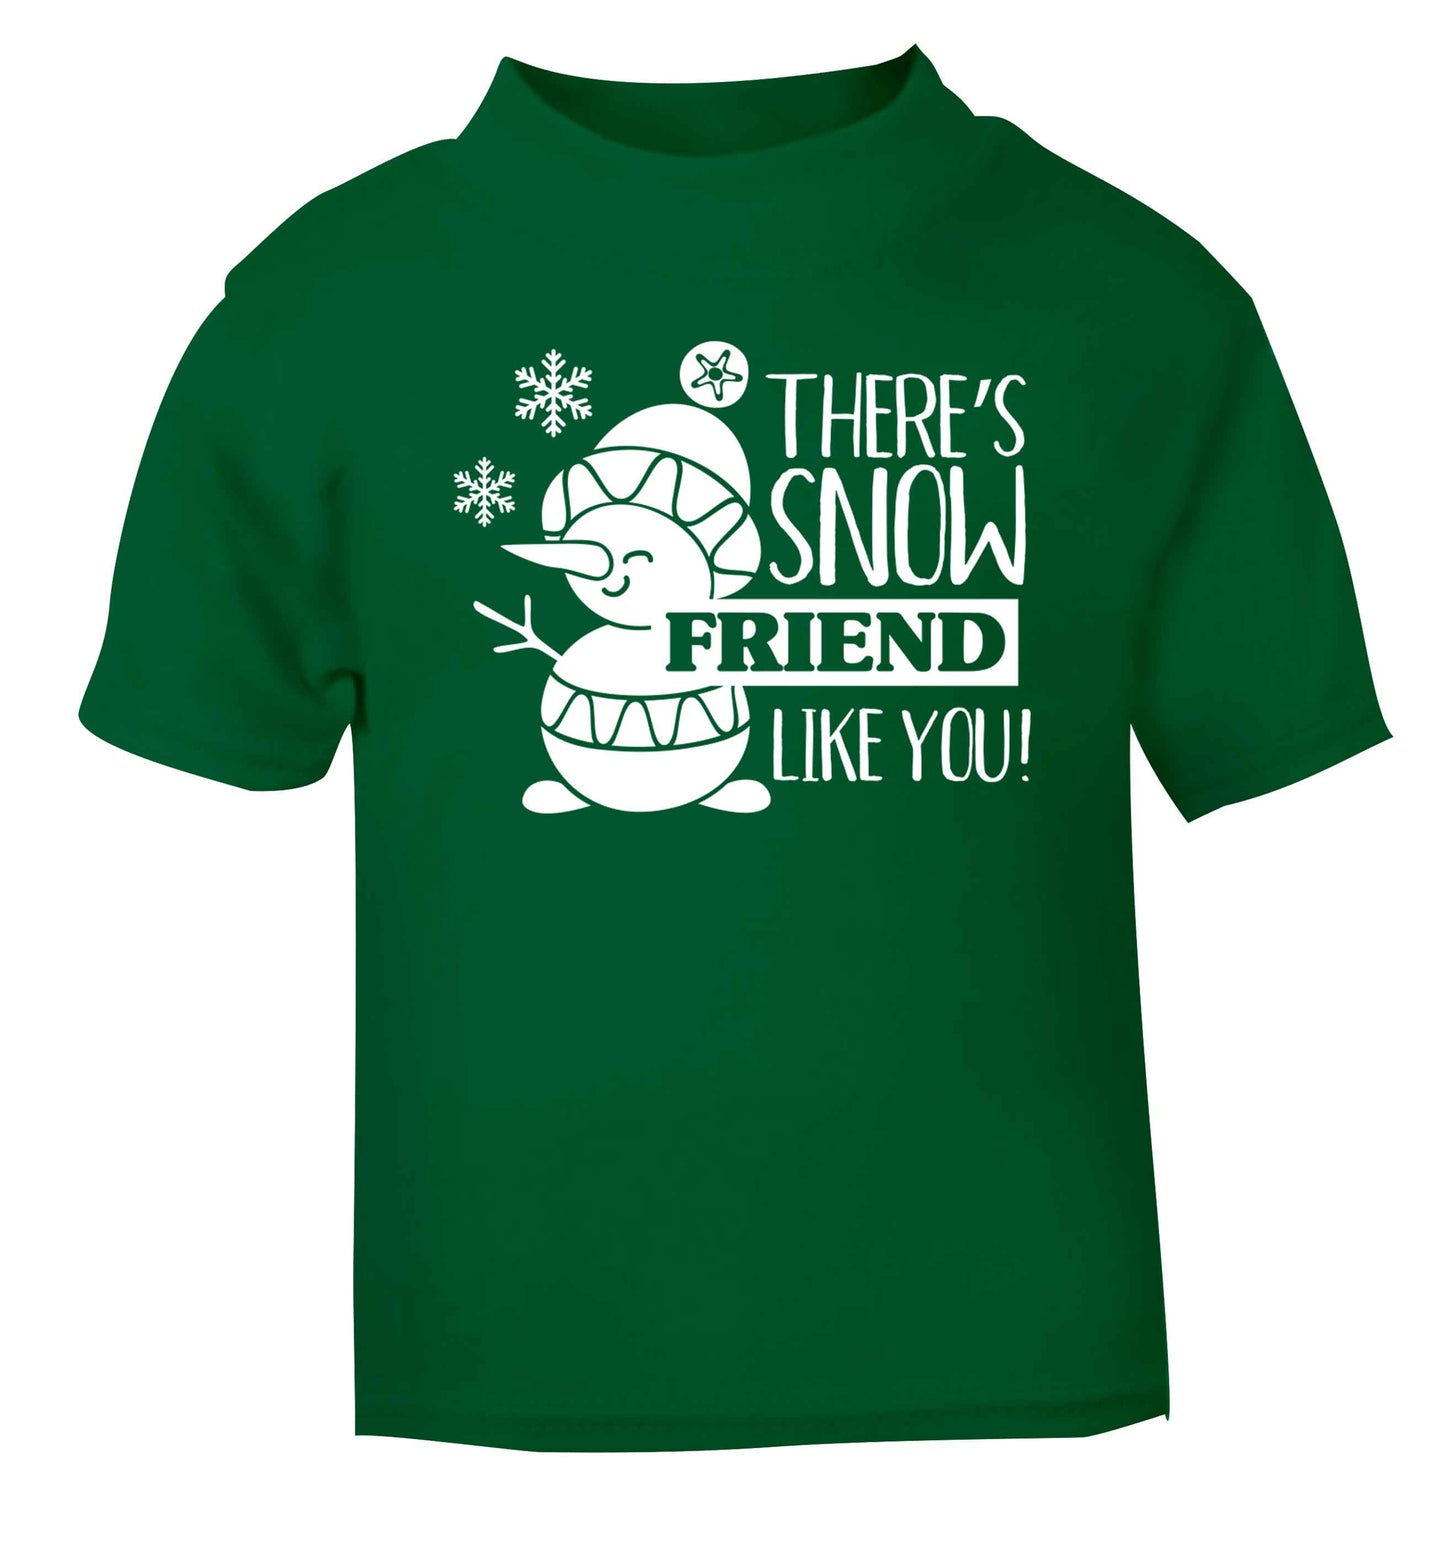 There's snow friend like you green baby toddler Tshirt 2 Years